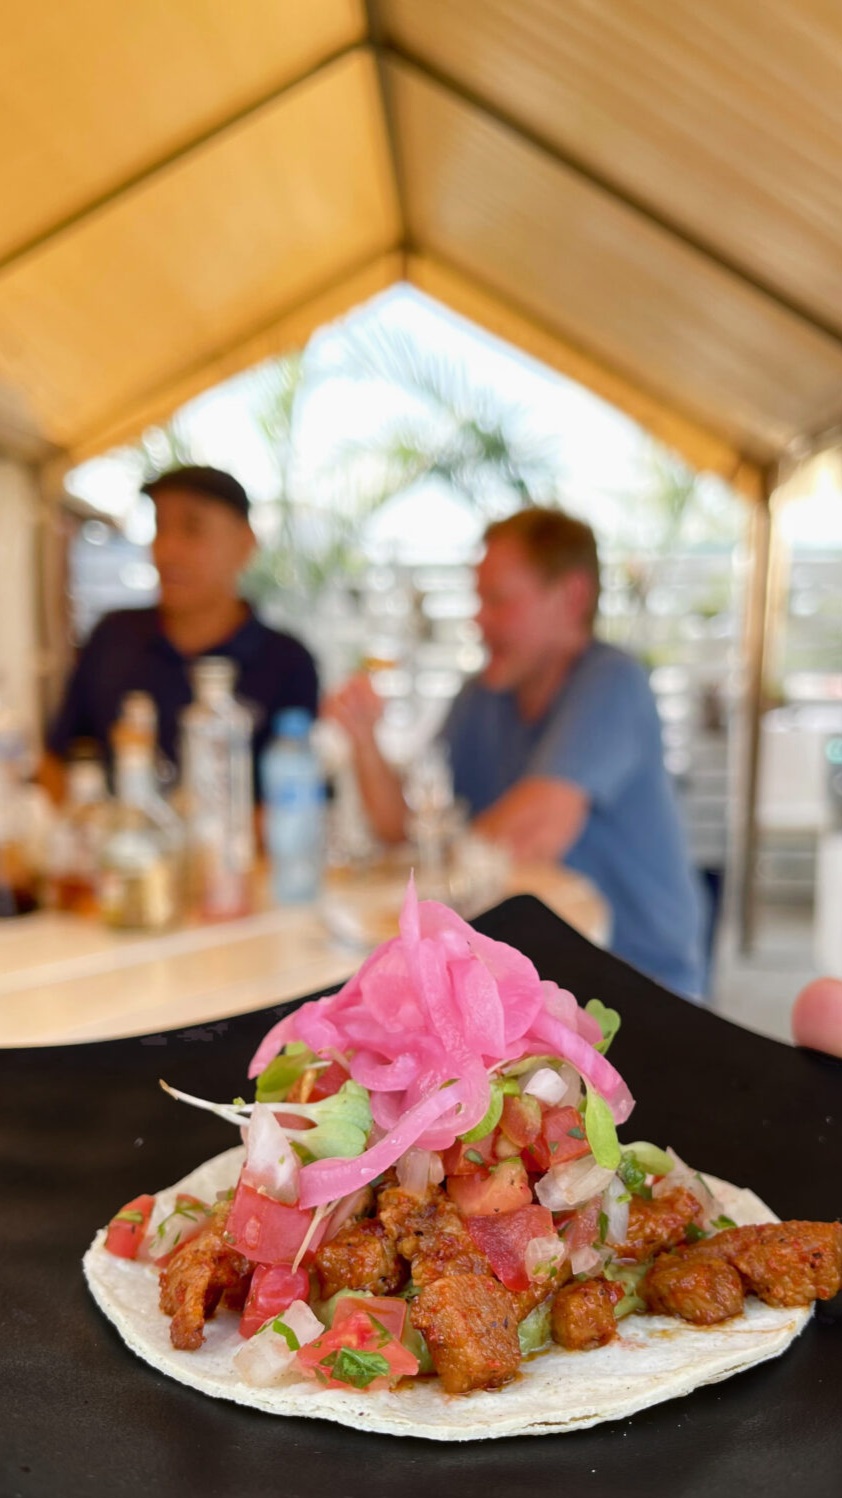 Delicious plate of food paired with tequila during Tequila University on Mondays at 4pm at La Sirena Puerto Morelos.